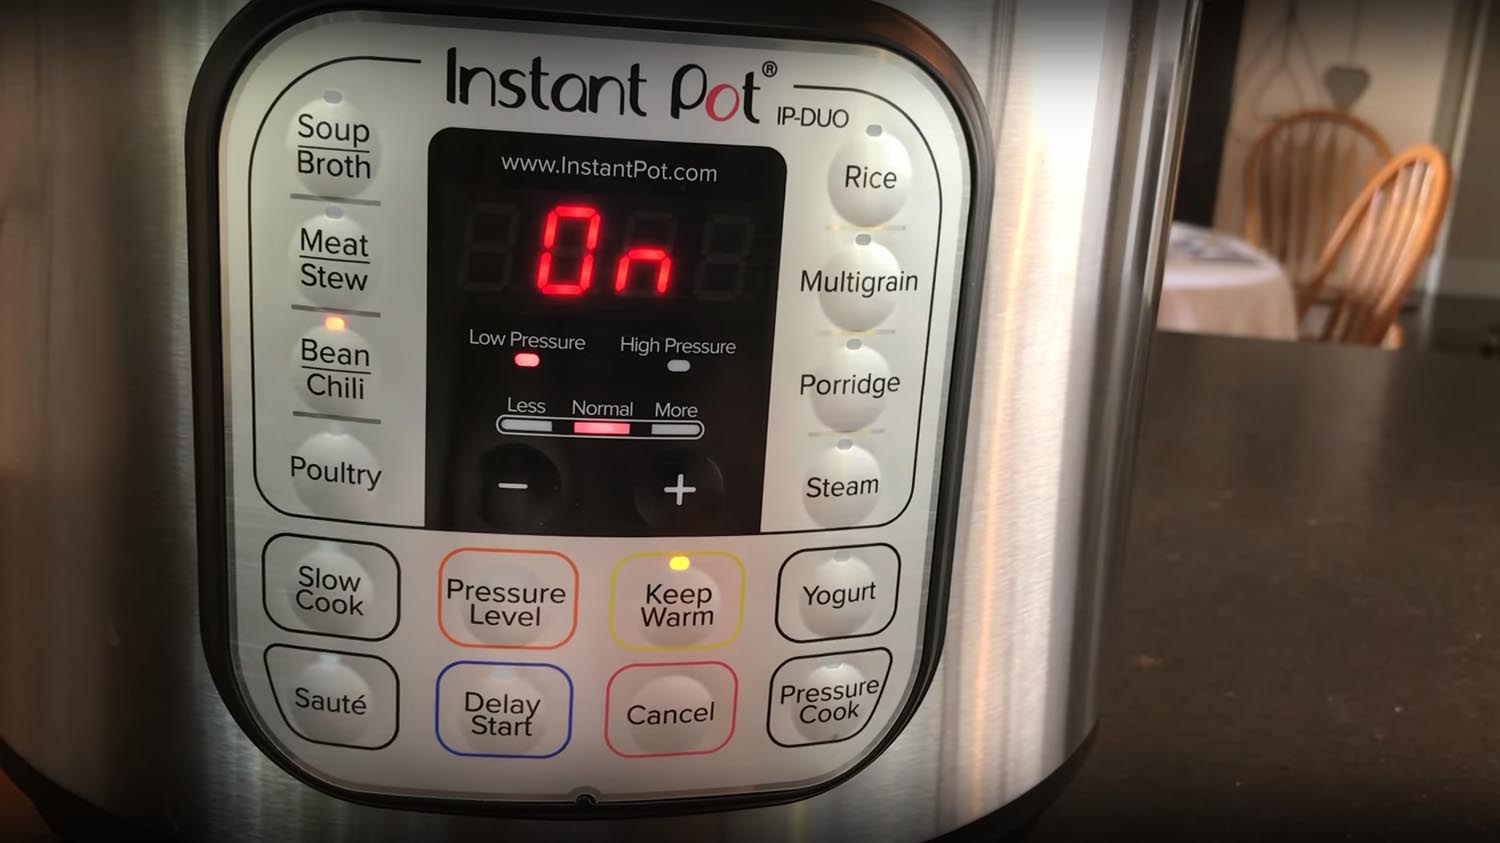 Instant Pot says on